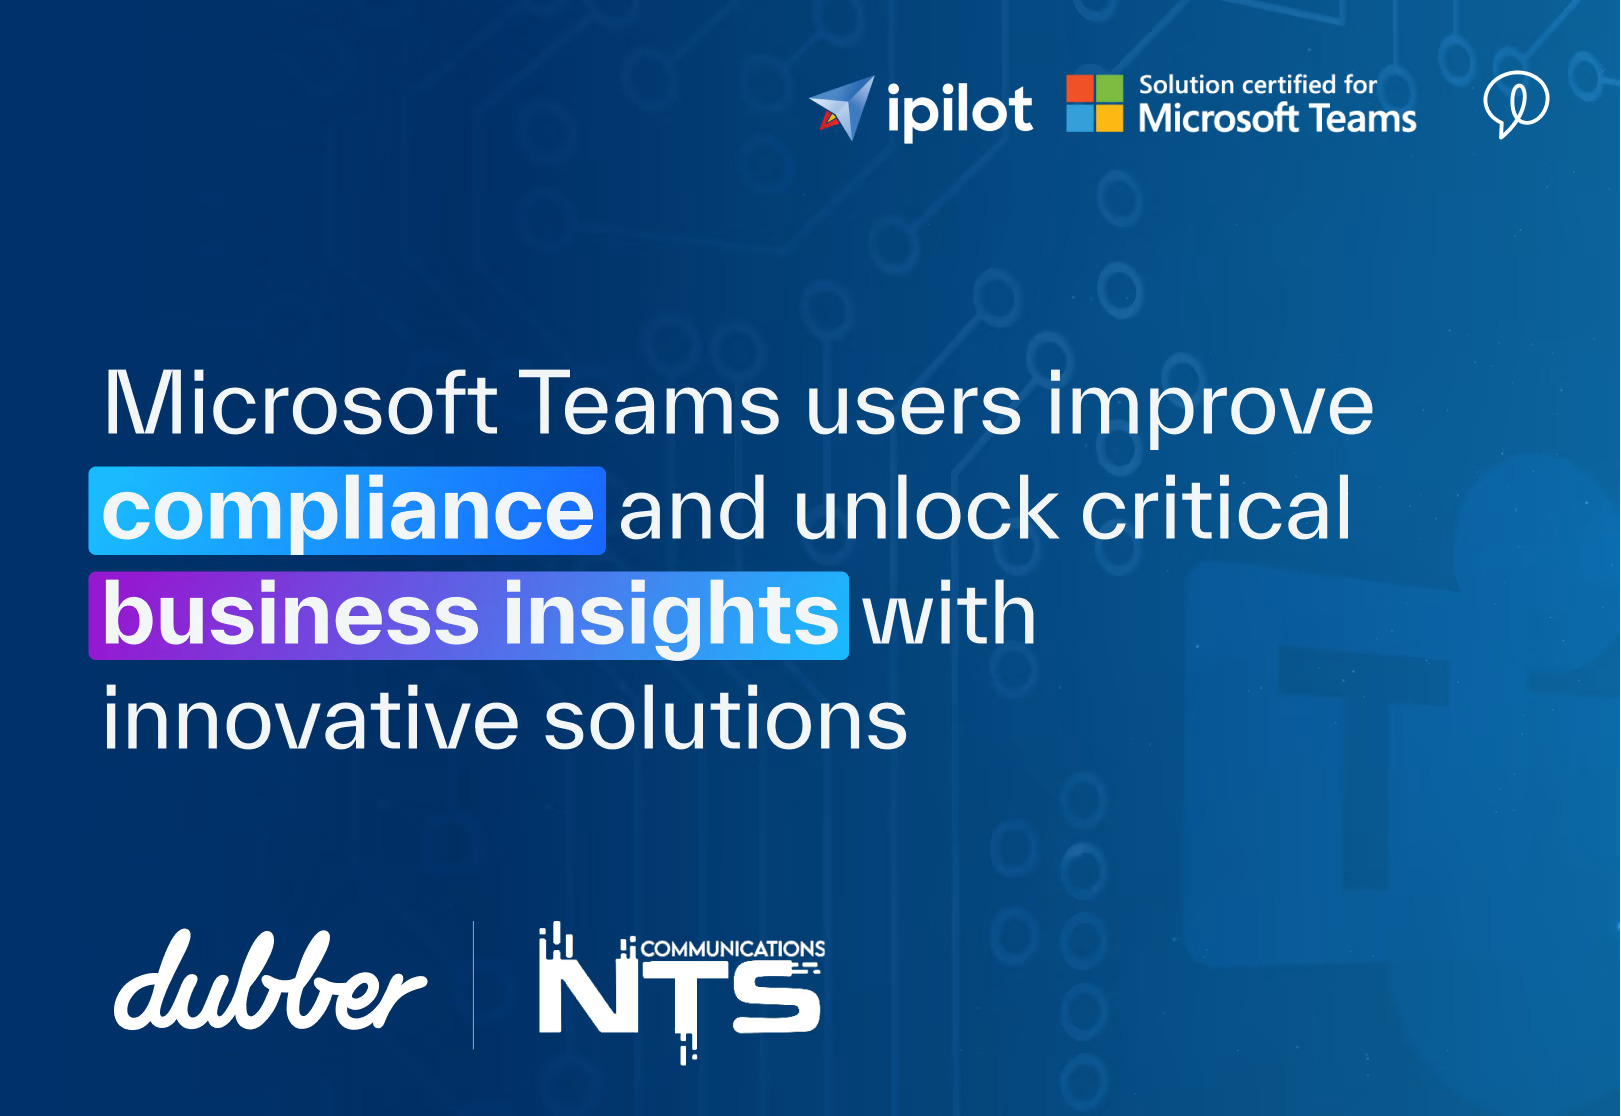 Microsoft Teams users improve compliance and unlock critical business insights with innovative Dubber and NTSCOM solutions